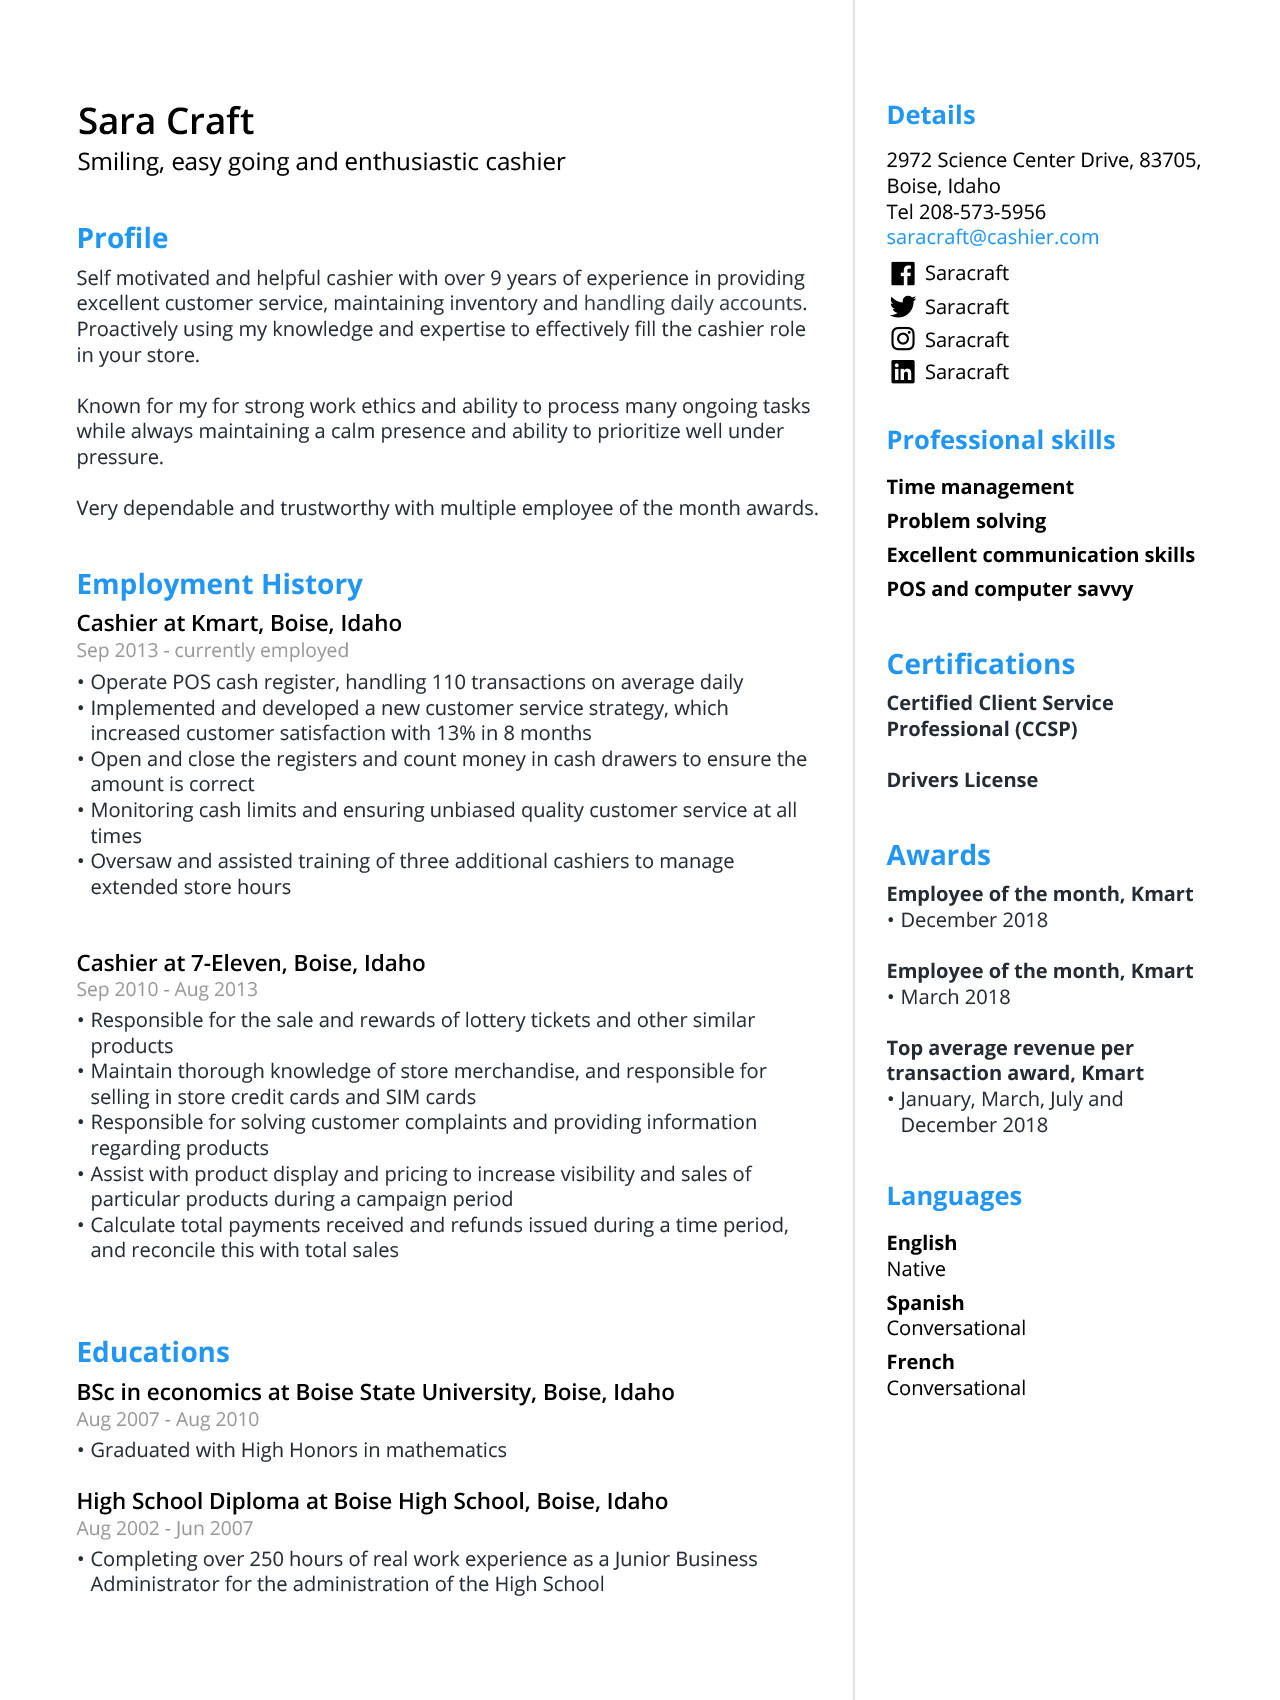 Sample Resume Showing Mail Copy Fax Office Equipment Experience Cashier Resume Sample & Template [2022 Guide] – Jofibo